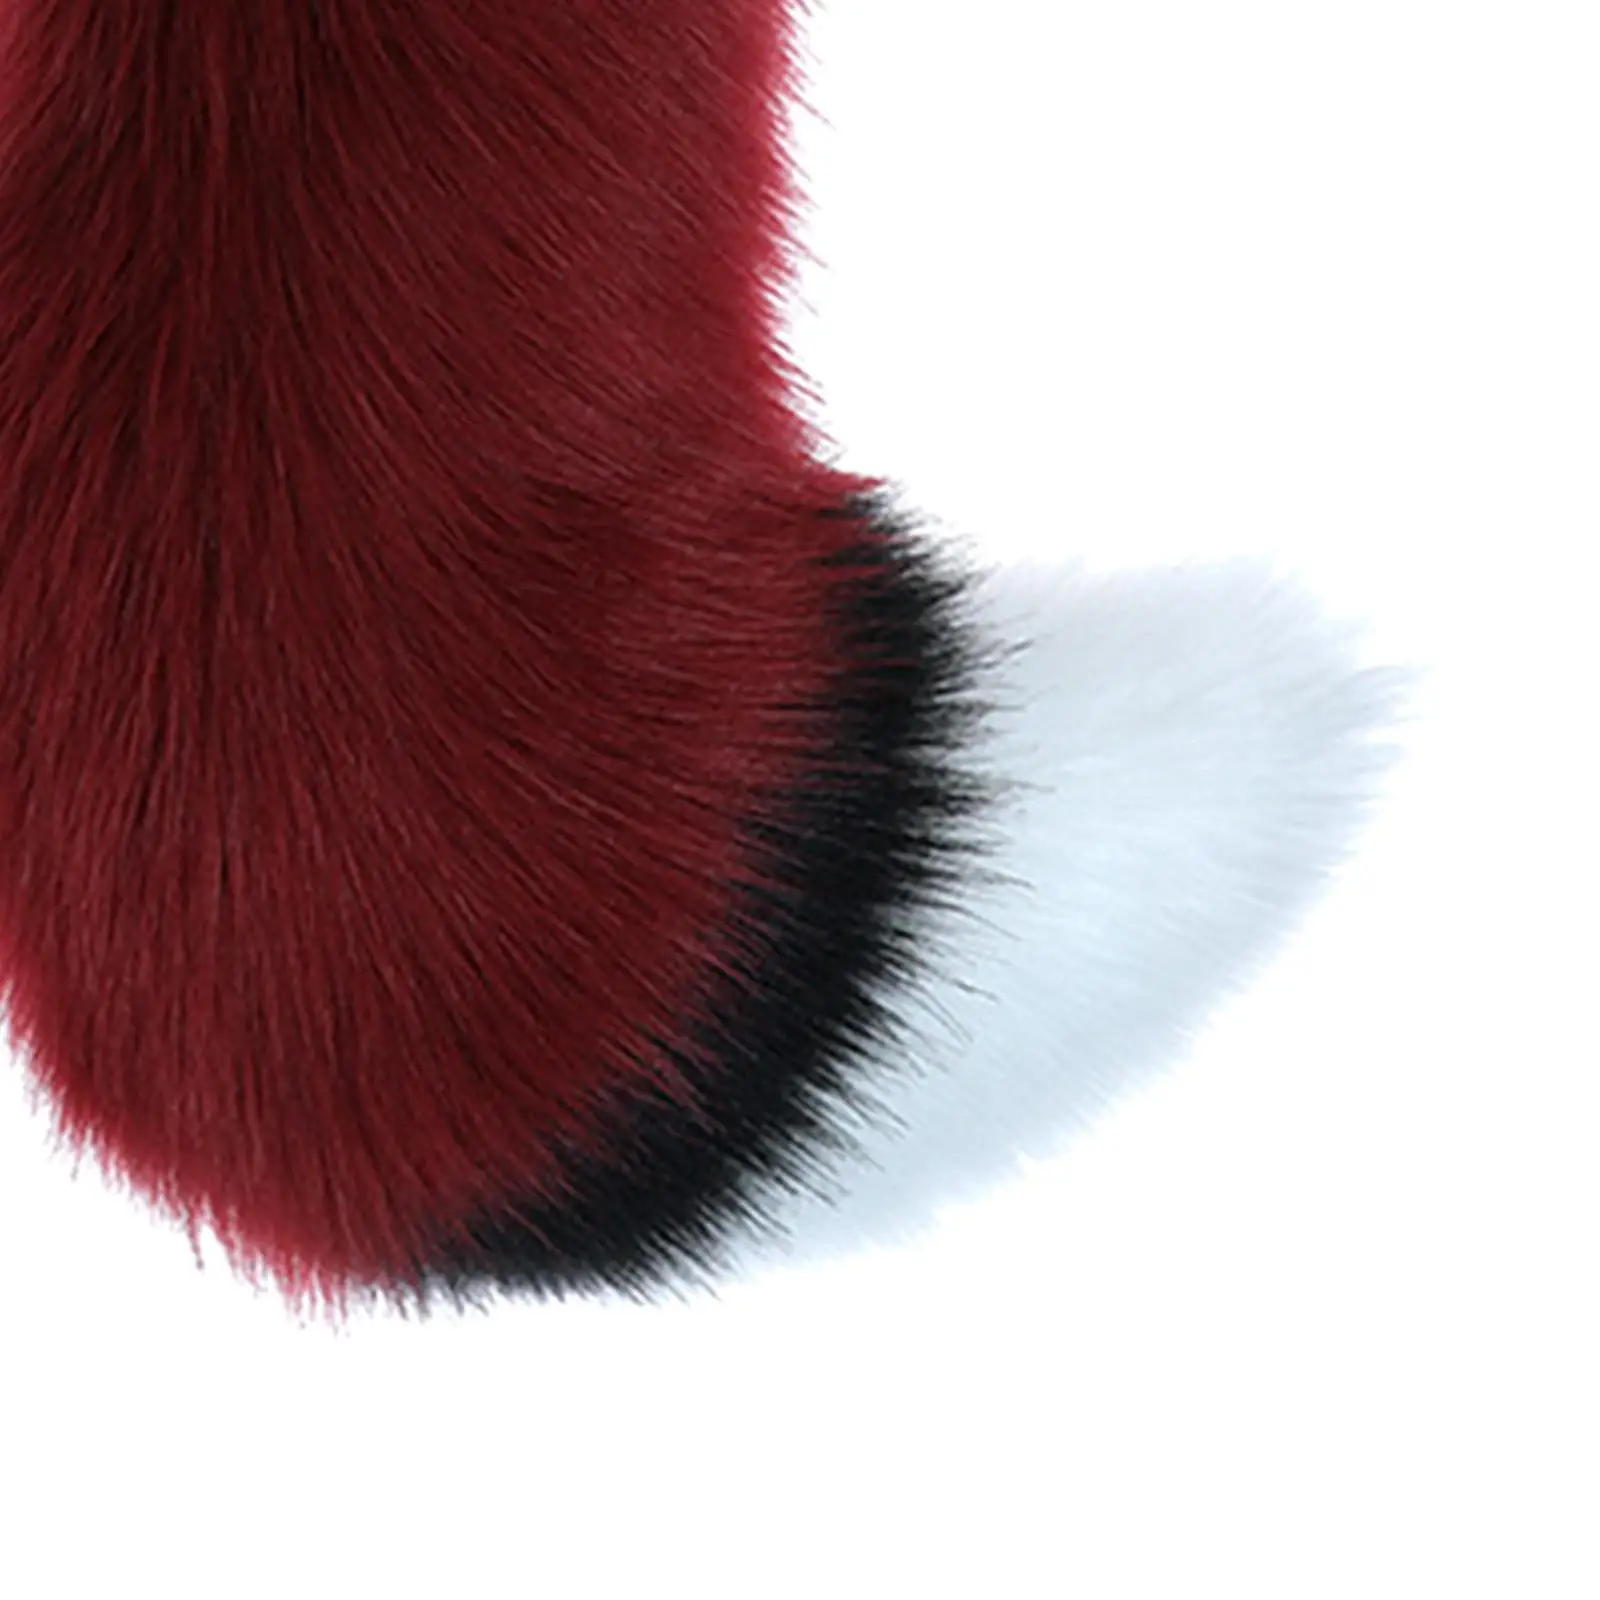 Faux Fur Wolf Ears and Tail Set Costume Accessories Fancy Dress Headwear Decor Decoration Gift Cosplay for Dress up Stage Shows